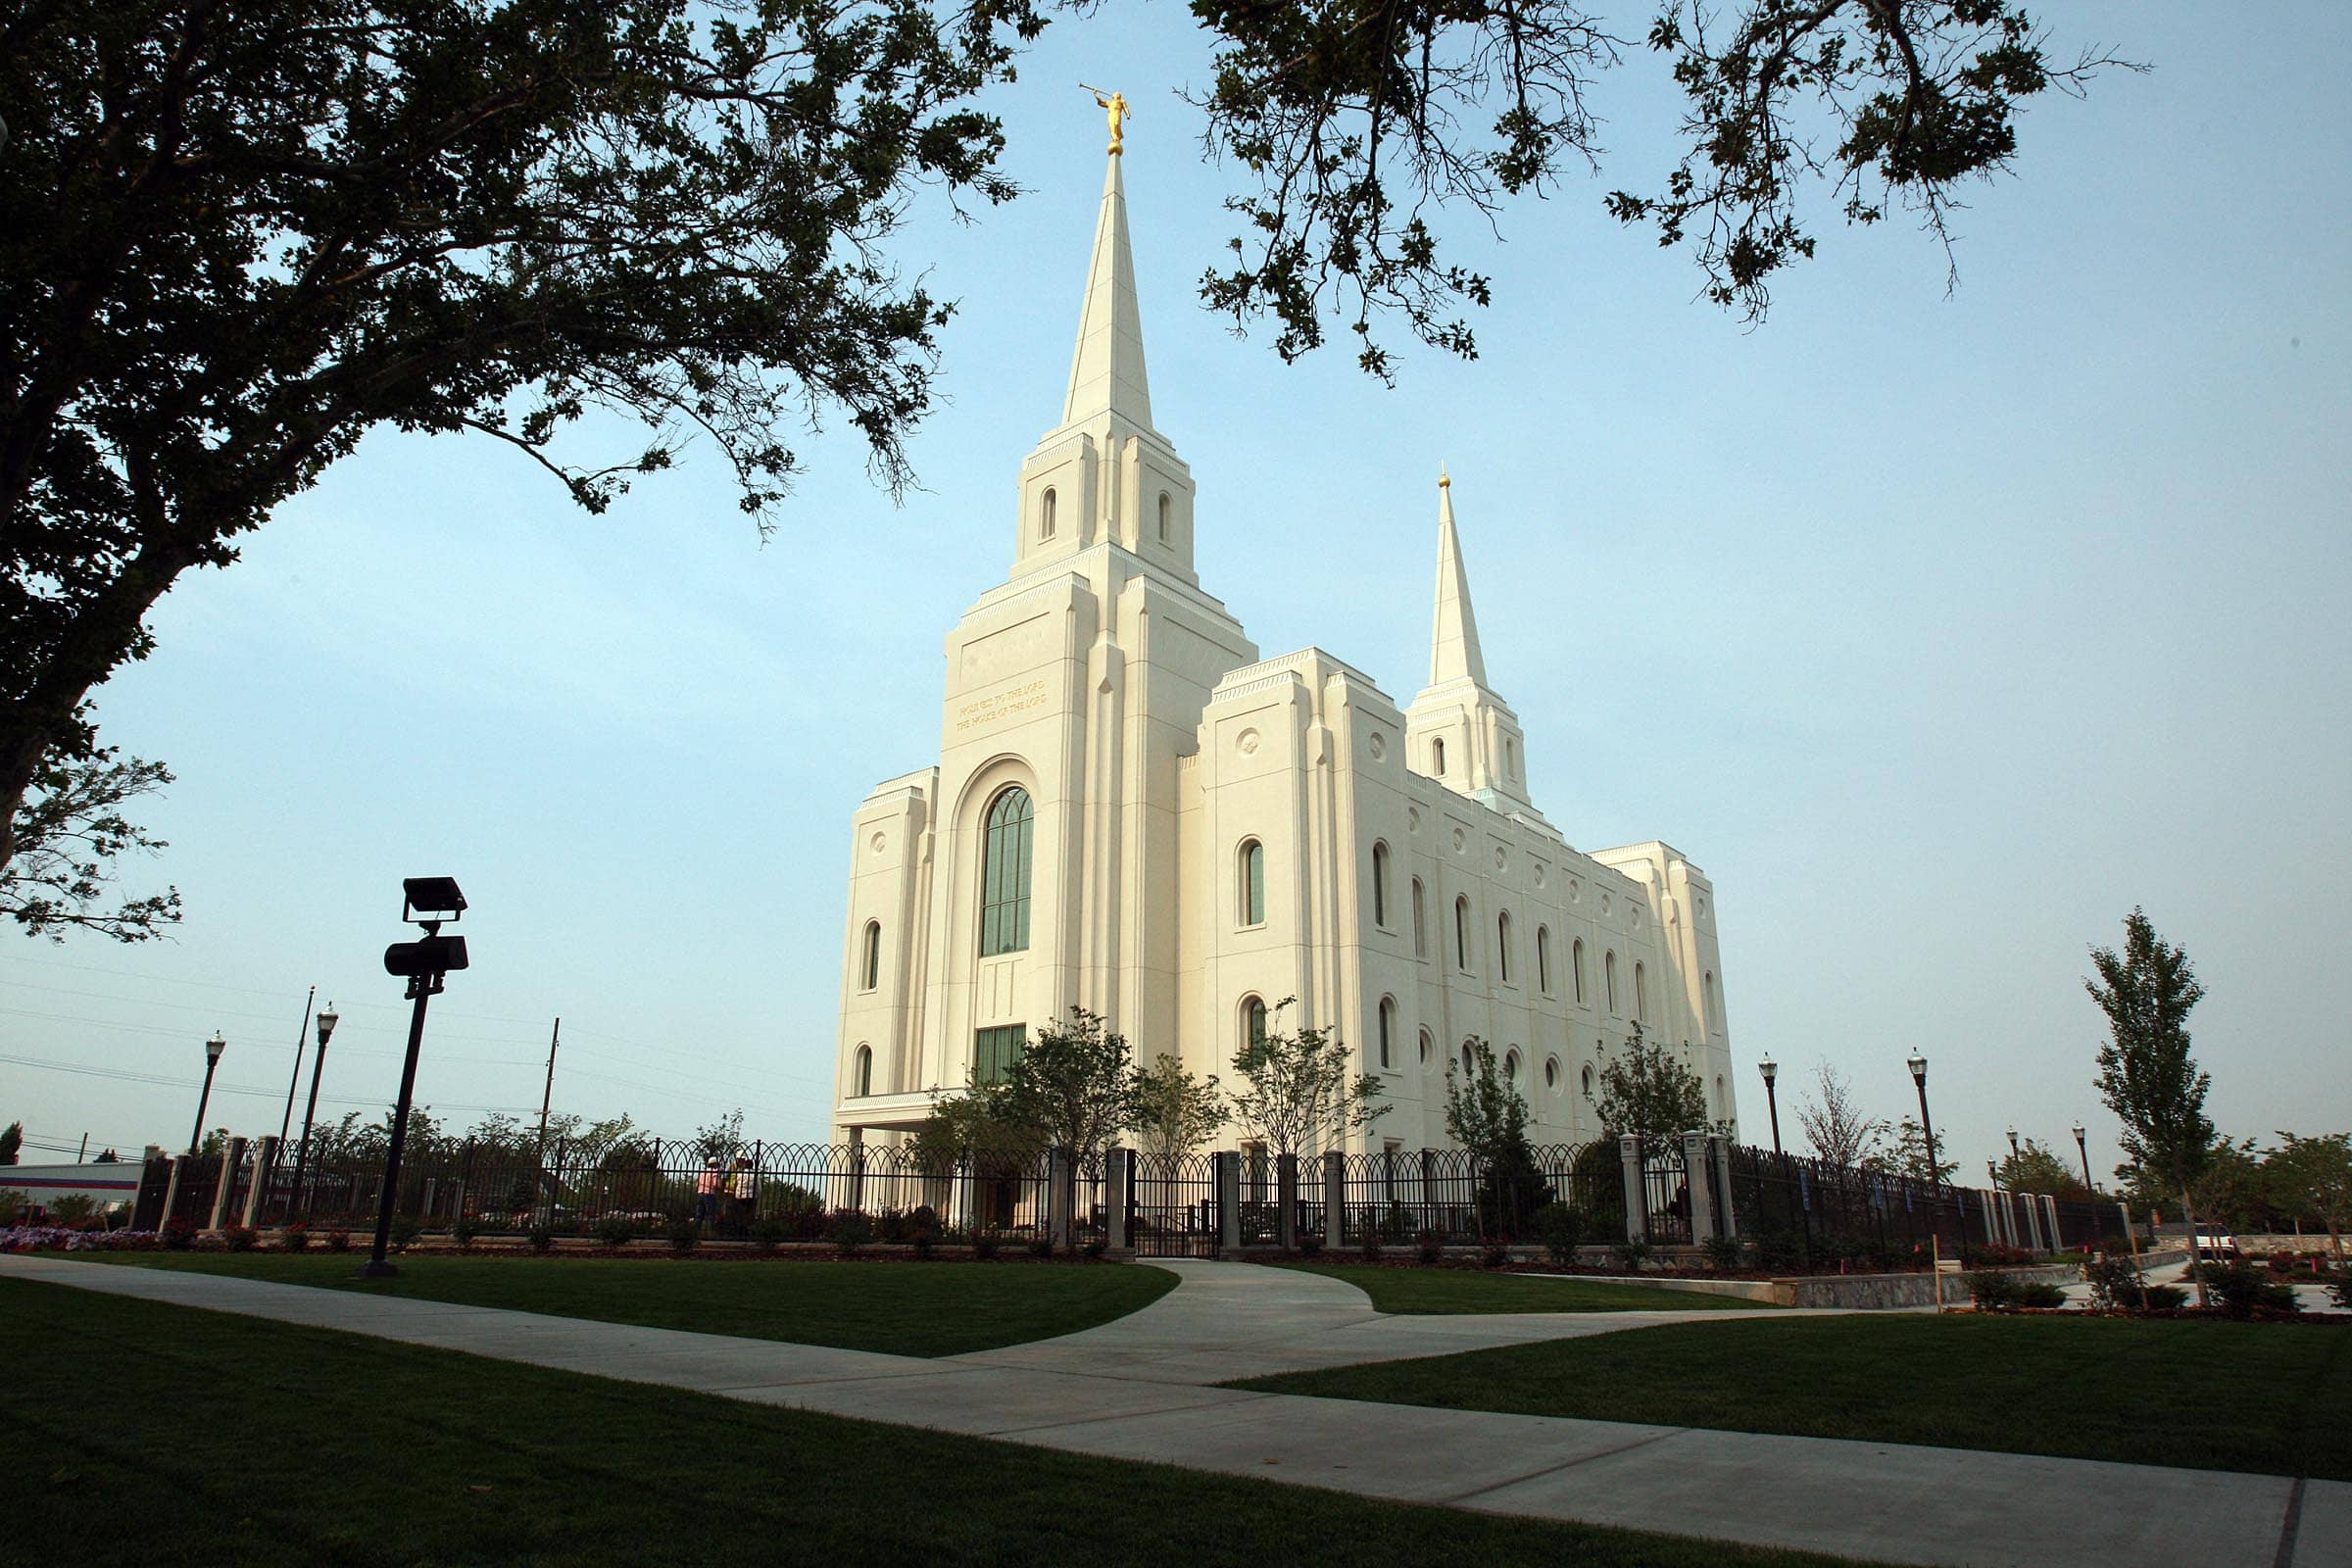 The Brigham City Utah Temple, a white building with spires at each end.